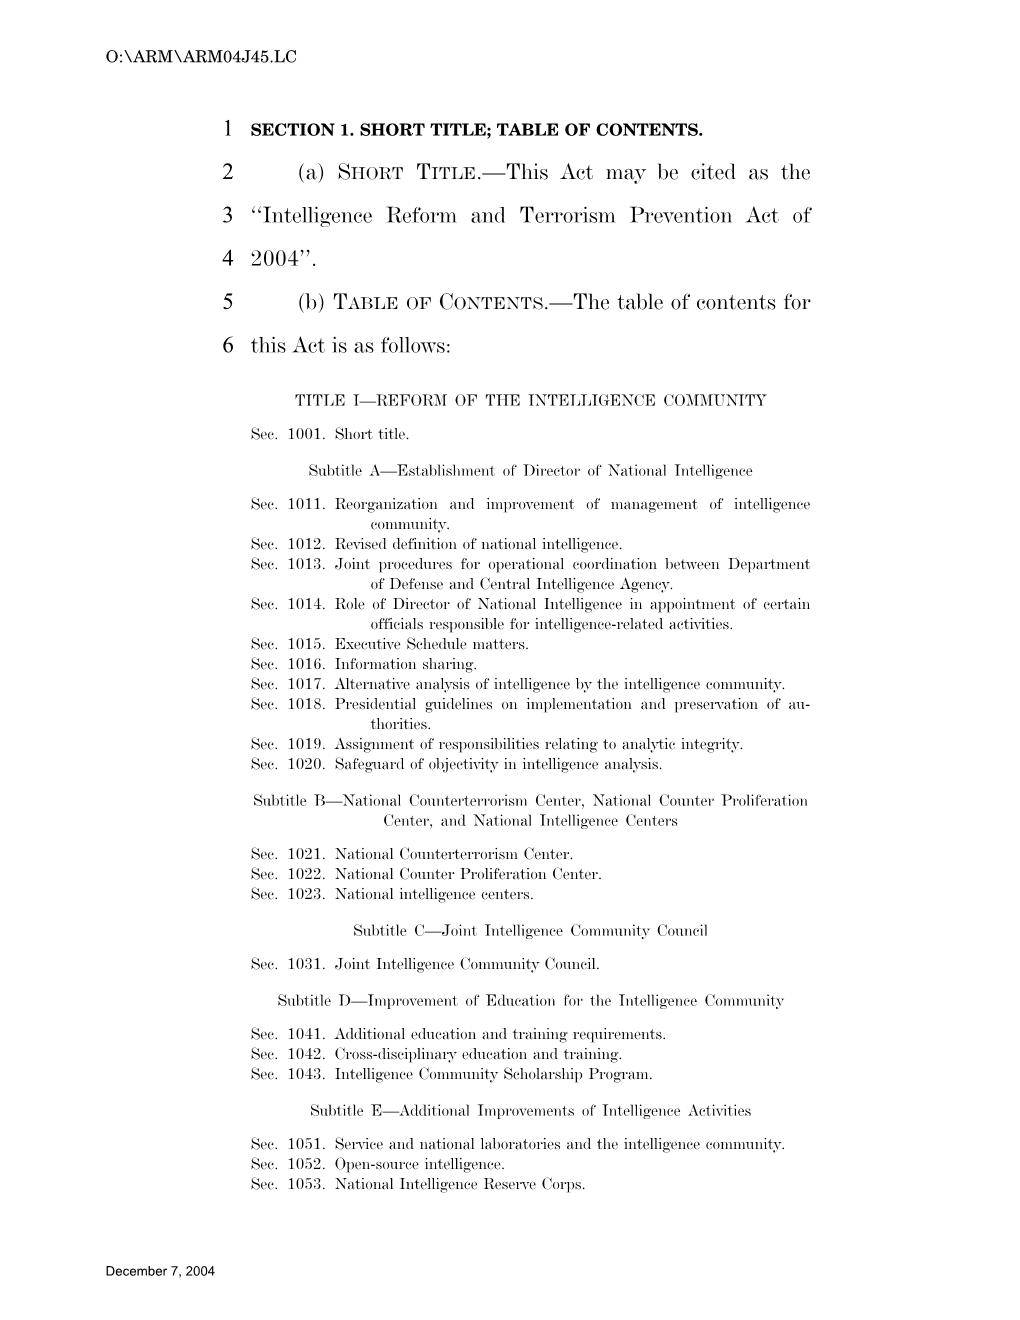 Conference Report on S.2845, the Intelligence Reform Bill